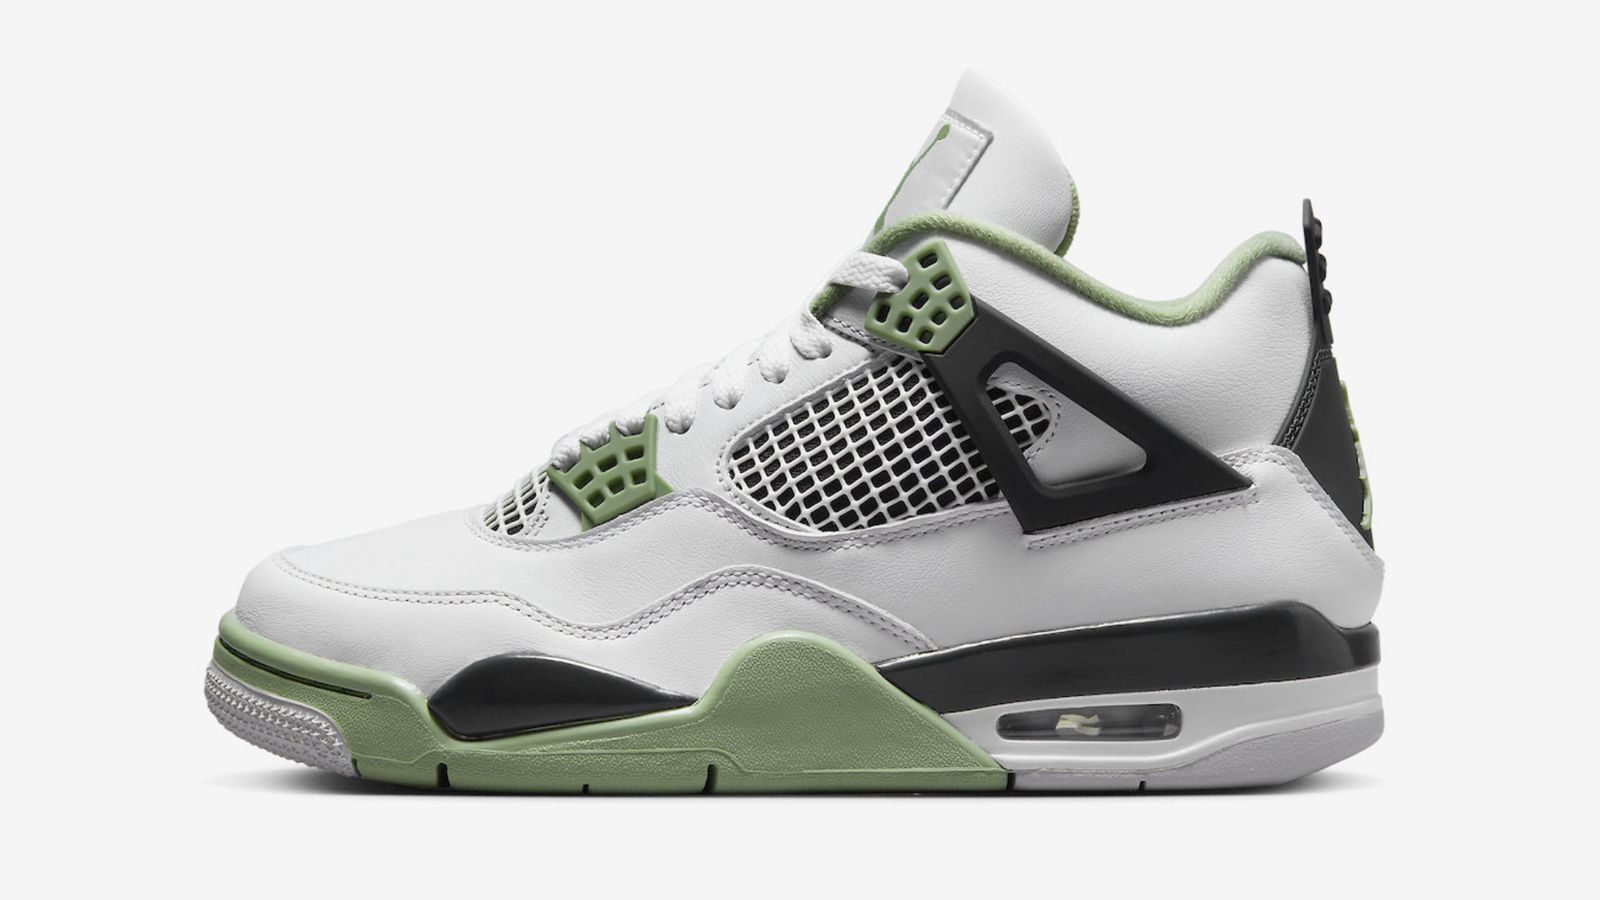 Air Jordan 4 "Seafoam" product image of a white leather sneaker featuring black and seafoam green details.